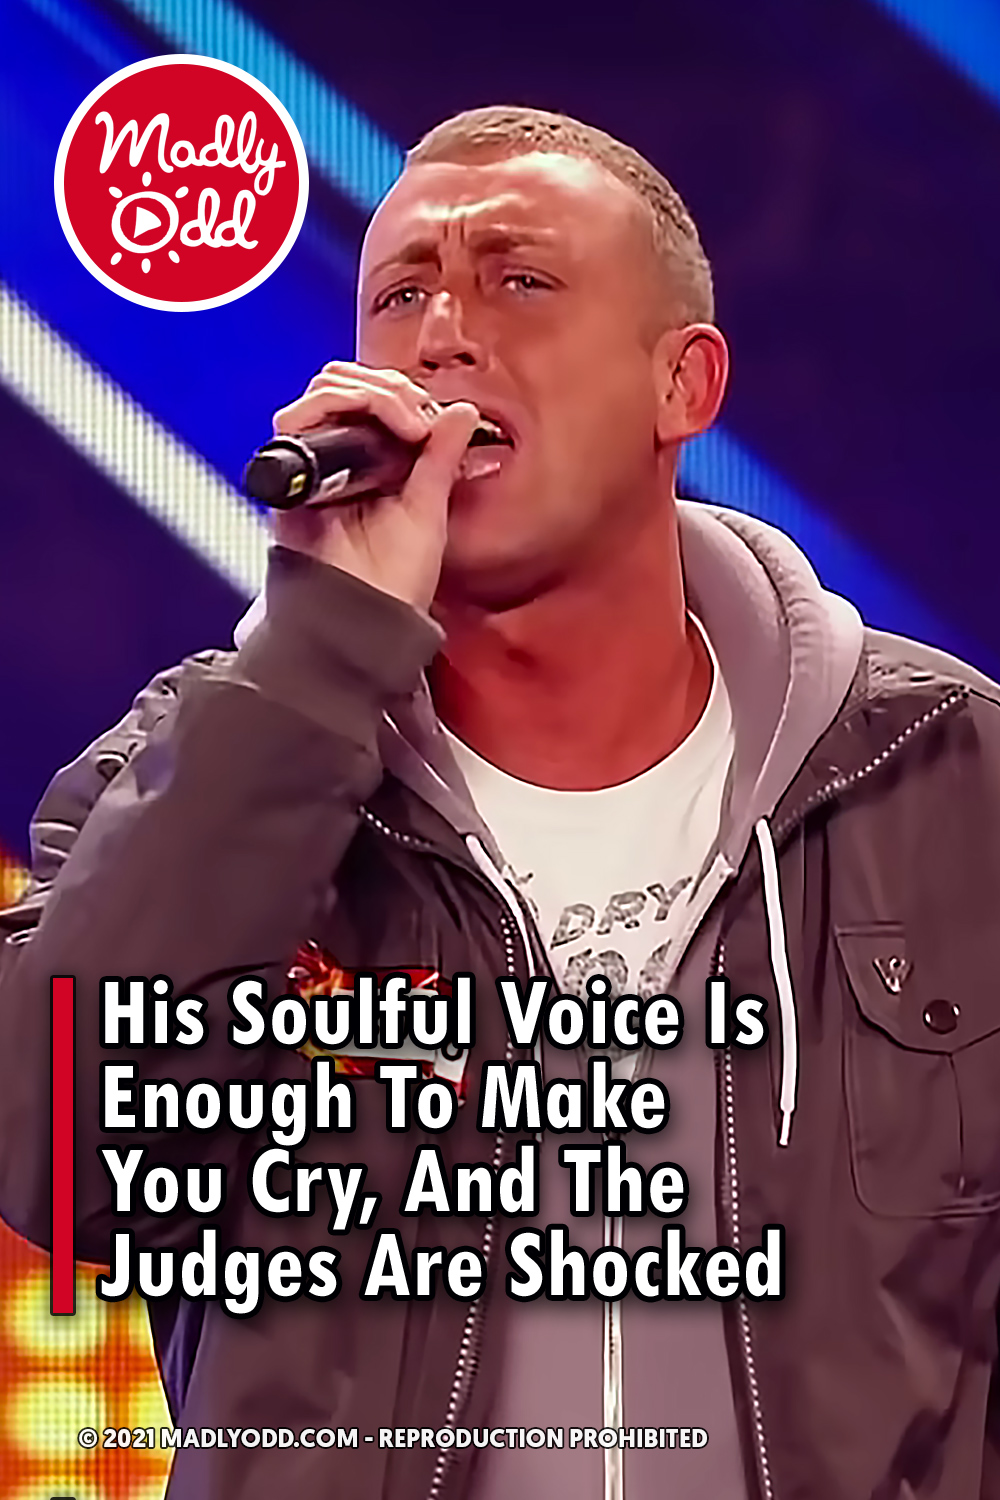 His Soulful Voice Is Enough To Make You Cry, And The Judges Are Shocked